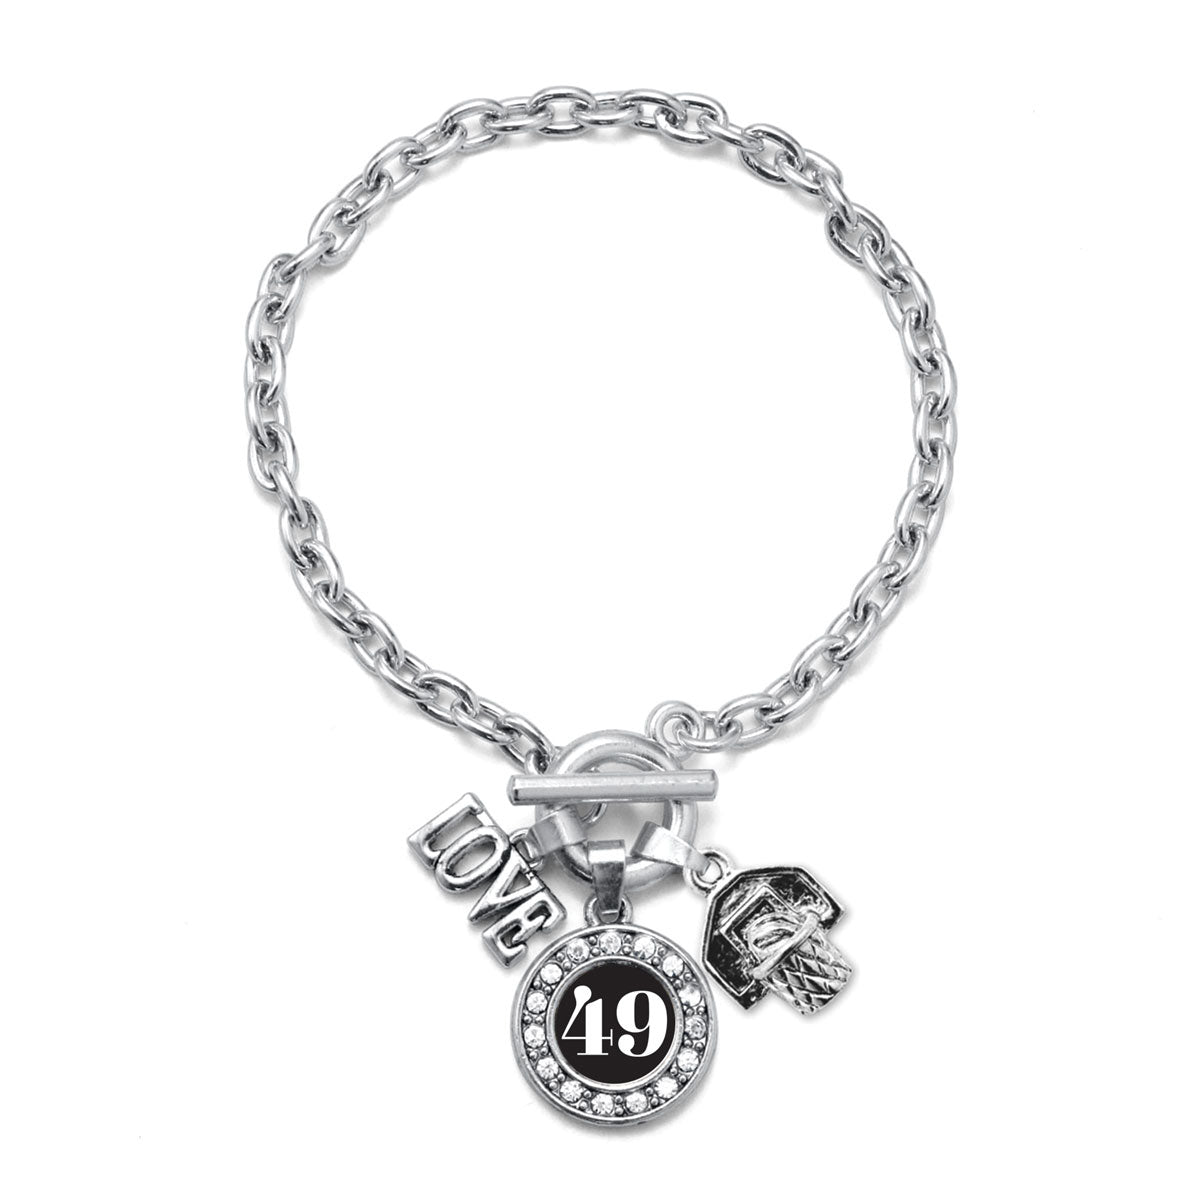 Silver Basketball Hoop - Sports Number 49 Circle Charm Toggle Bracelet